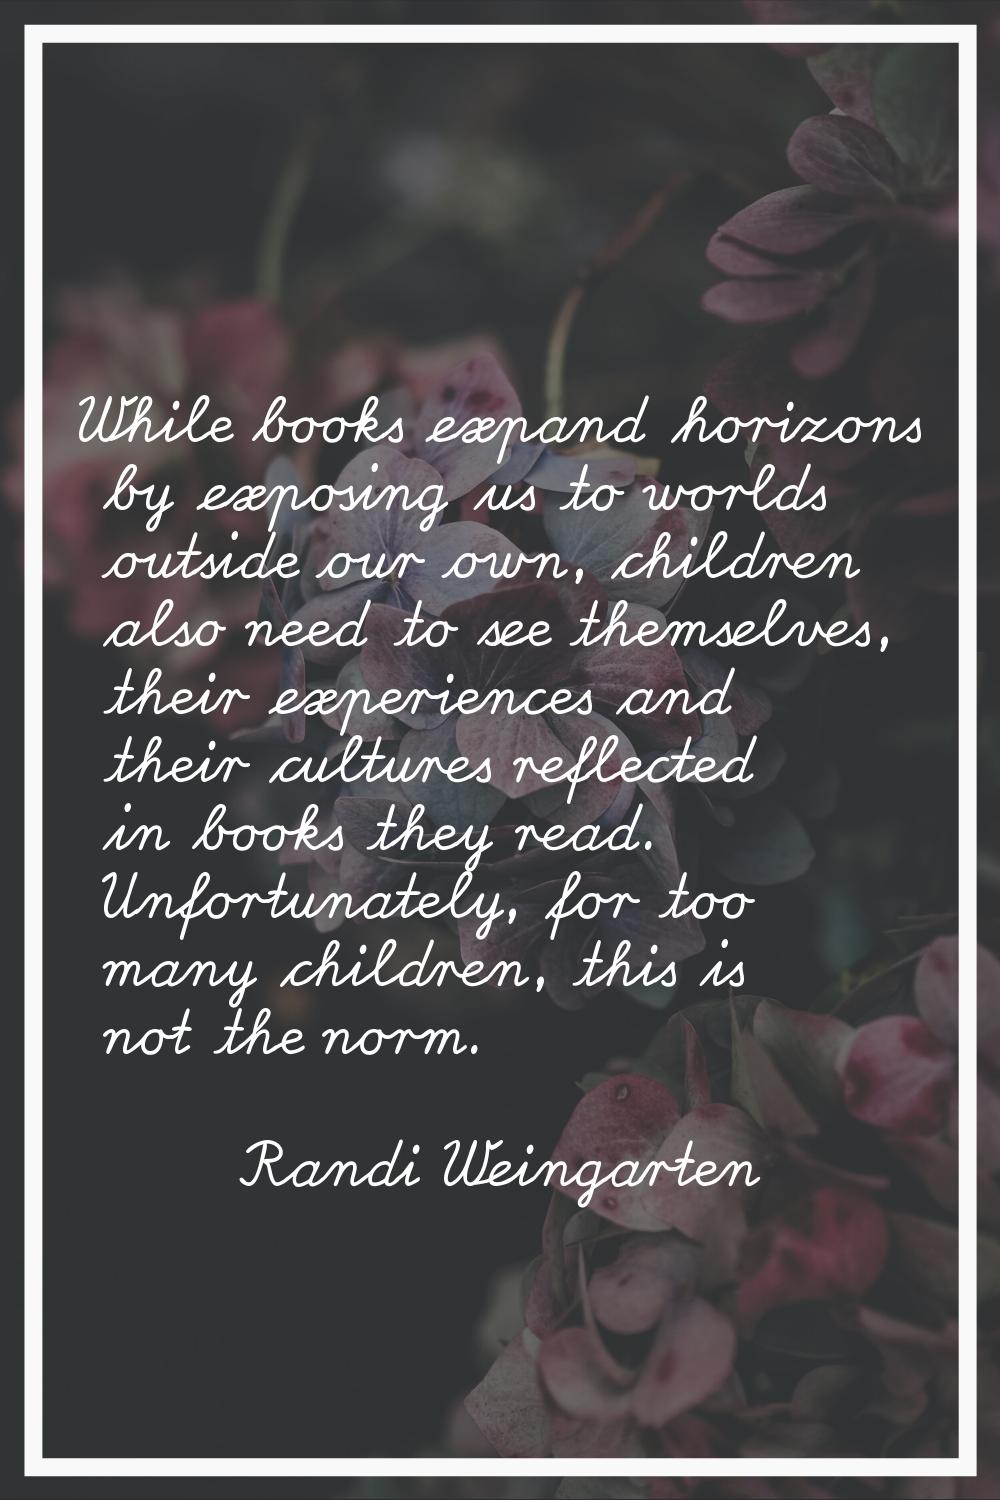 While books expand horizons by exposing us to worlds outside our own, children also need to see the